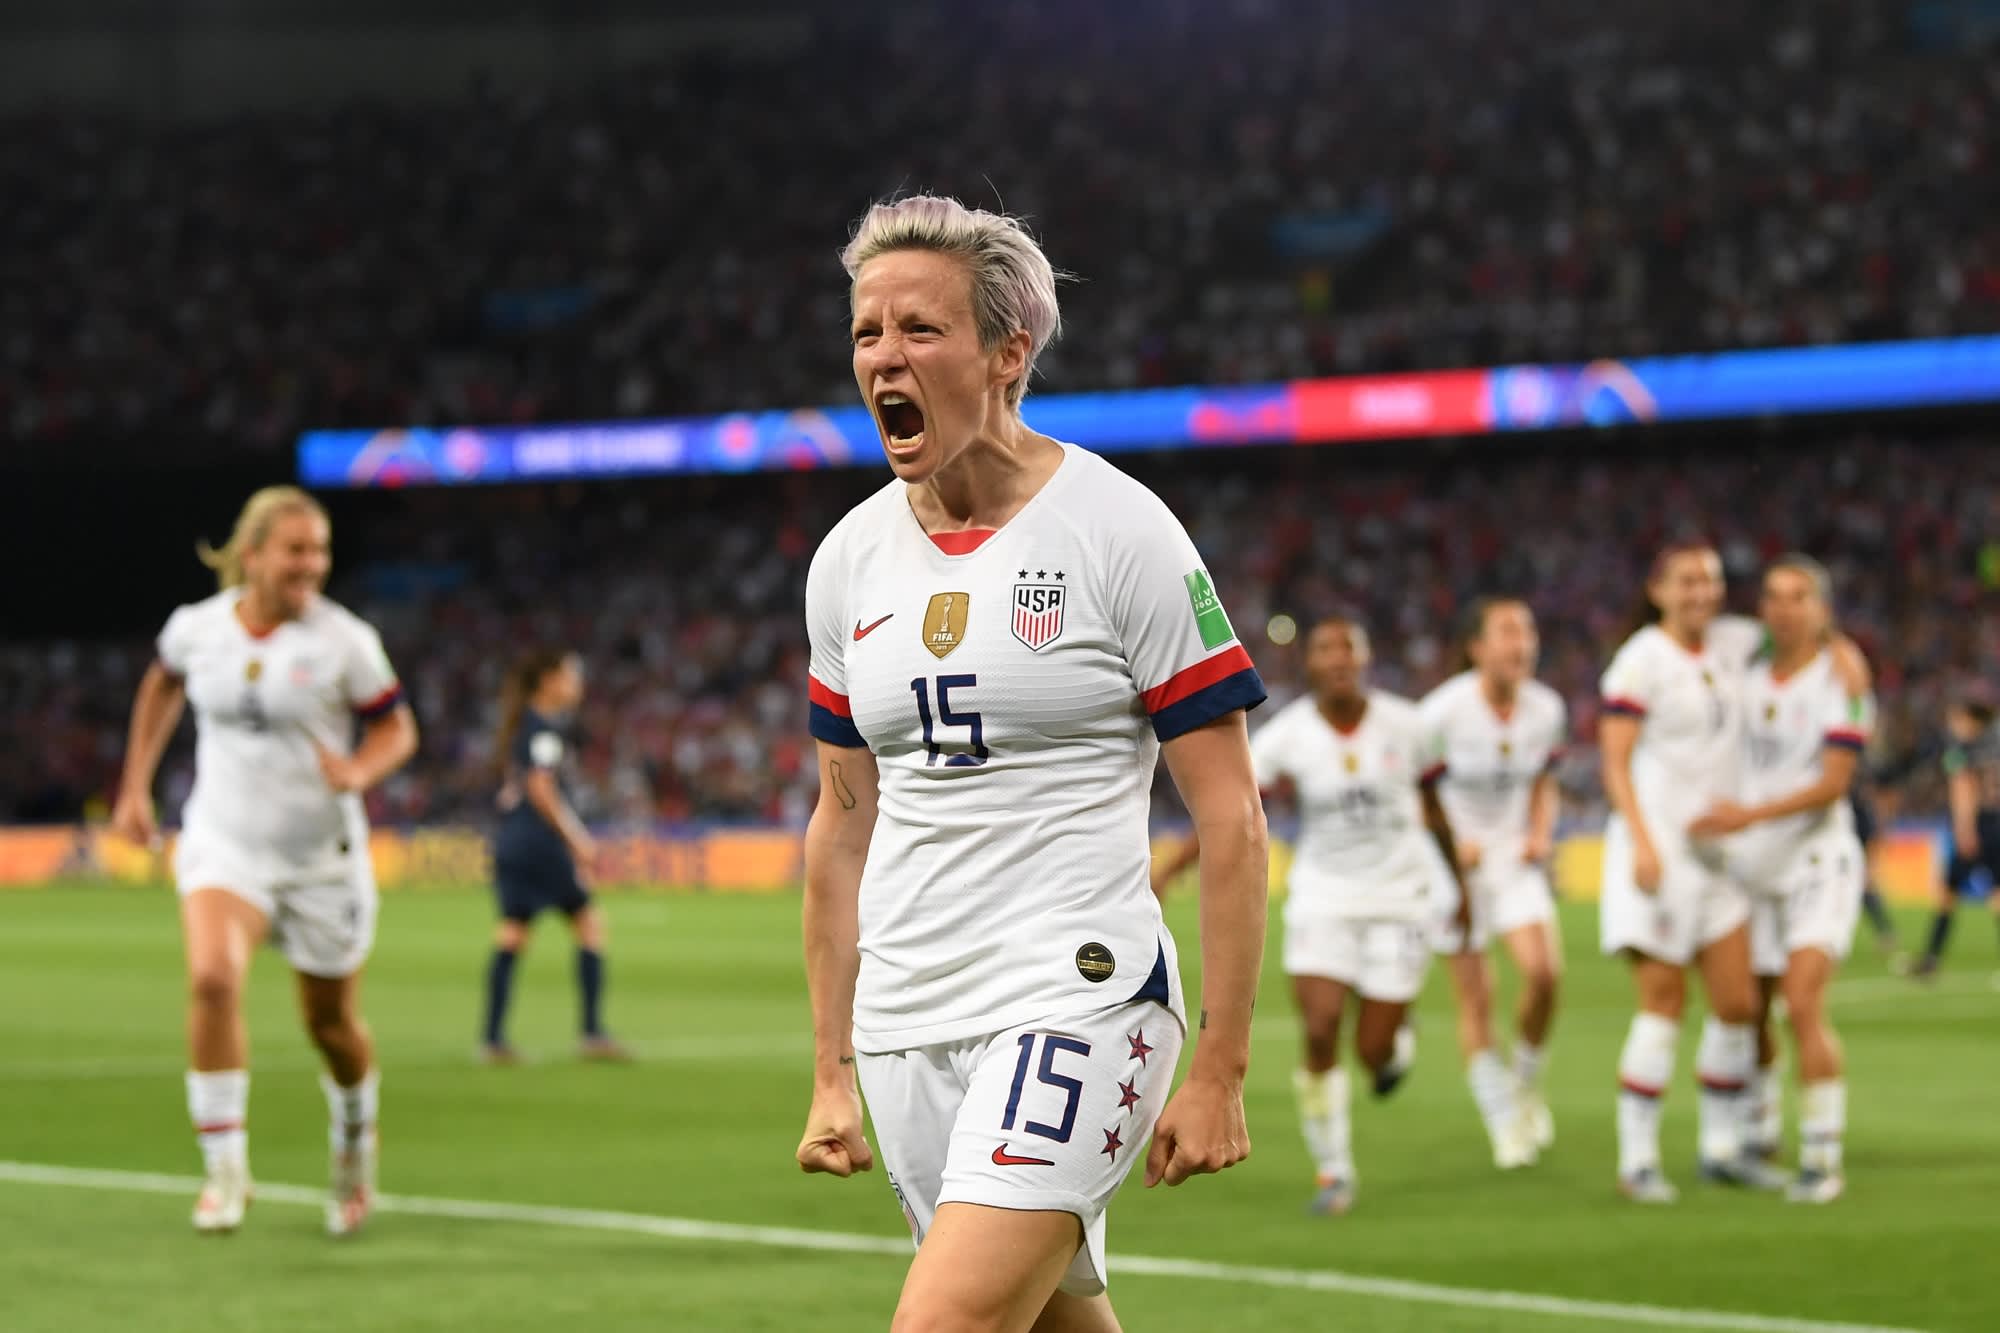 Megan Rapinoe #15 of the United States celebrates scoring during the 2019 FIFA Women’s World Cup France quarter-final match between France and the United States at Parc des Princes on June 28, 2019 in Paris, France.Brad Smith/ISI Photos/Getty Images
